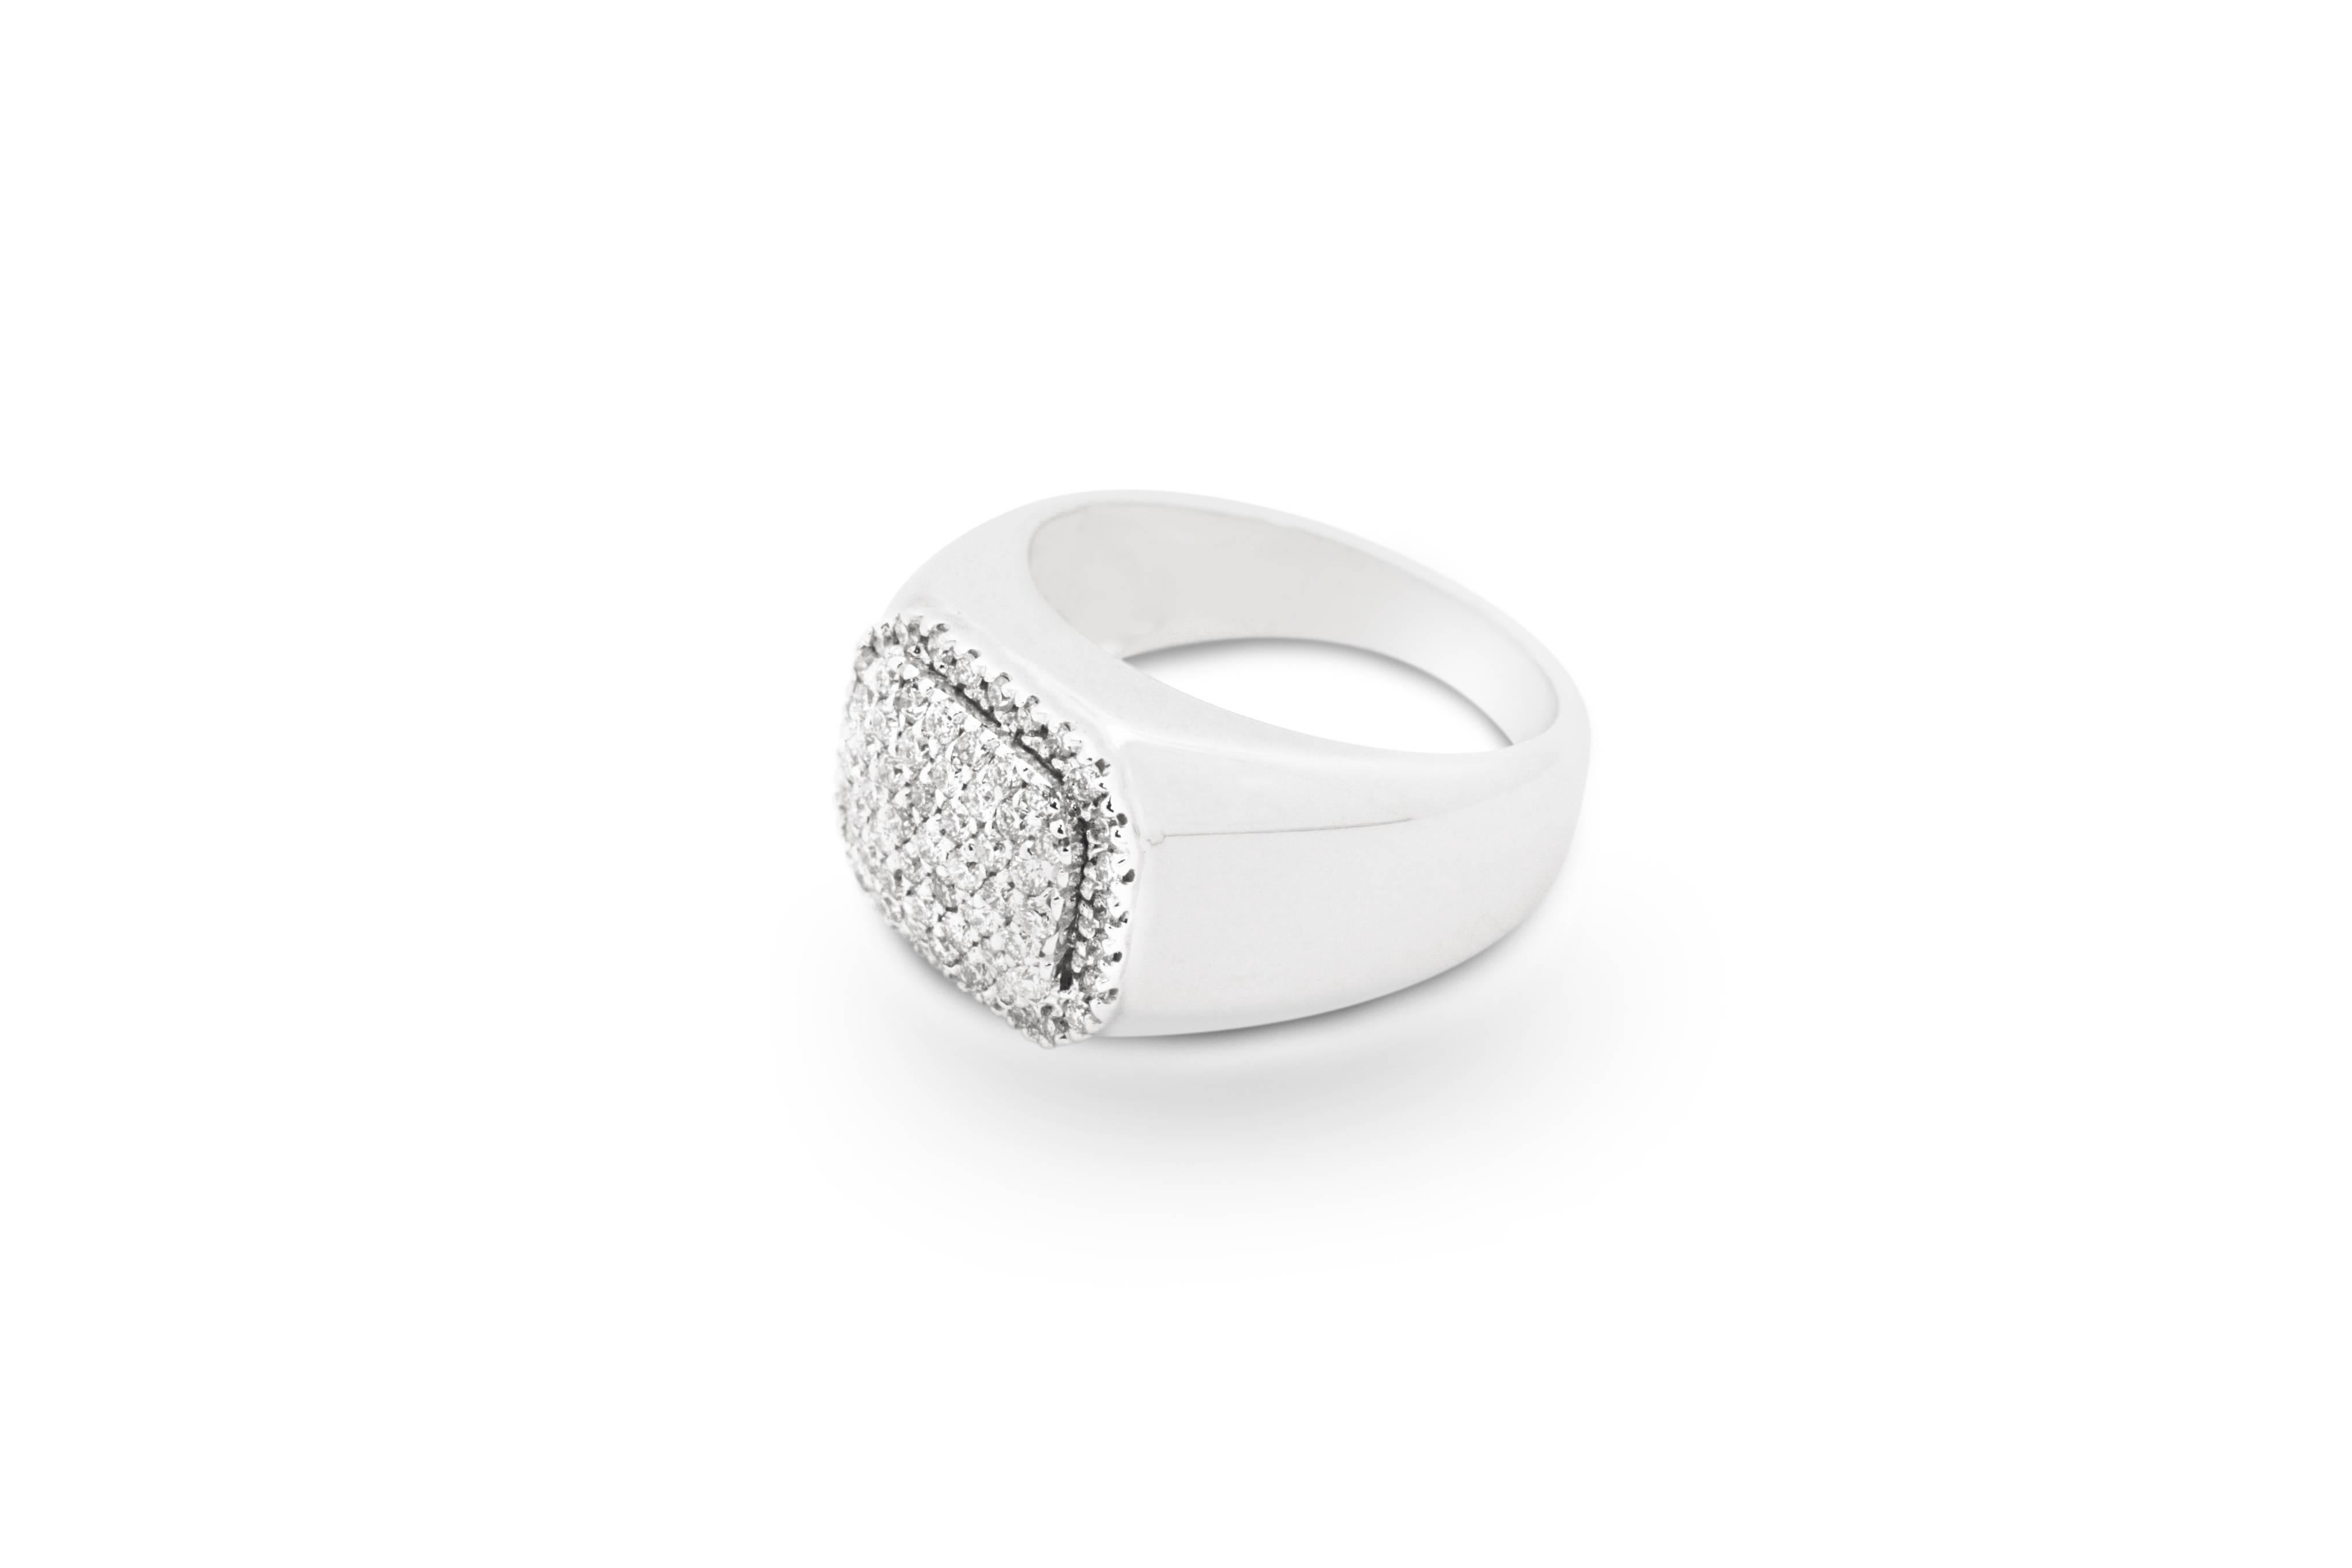 From FERRUCCi a Dome Diamond Pave ring made in Italy in 18k white gold,
with a total of hand set 0.80 carat Diamonds for a chic and sophisticated taste

Ring size 5 1/2, complimentary sizing upon order